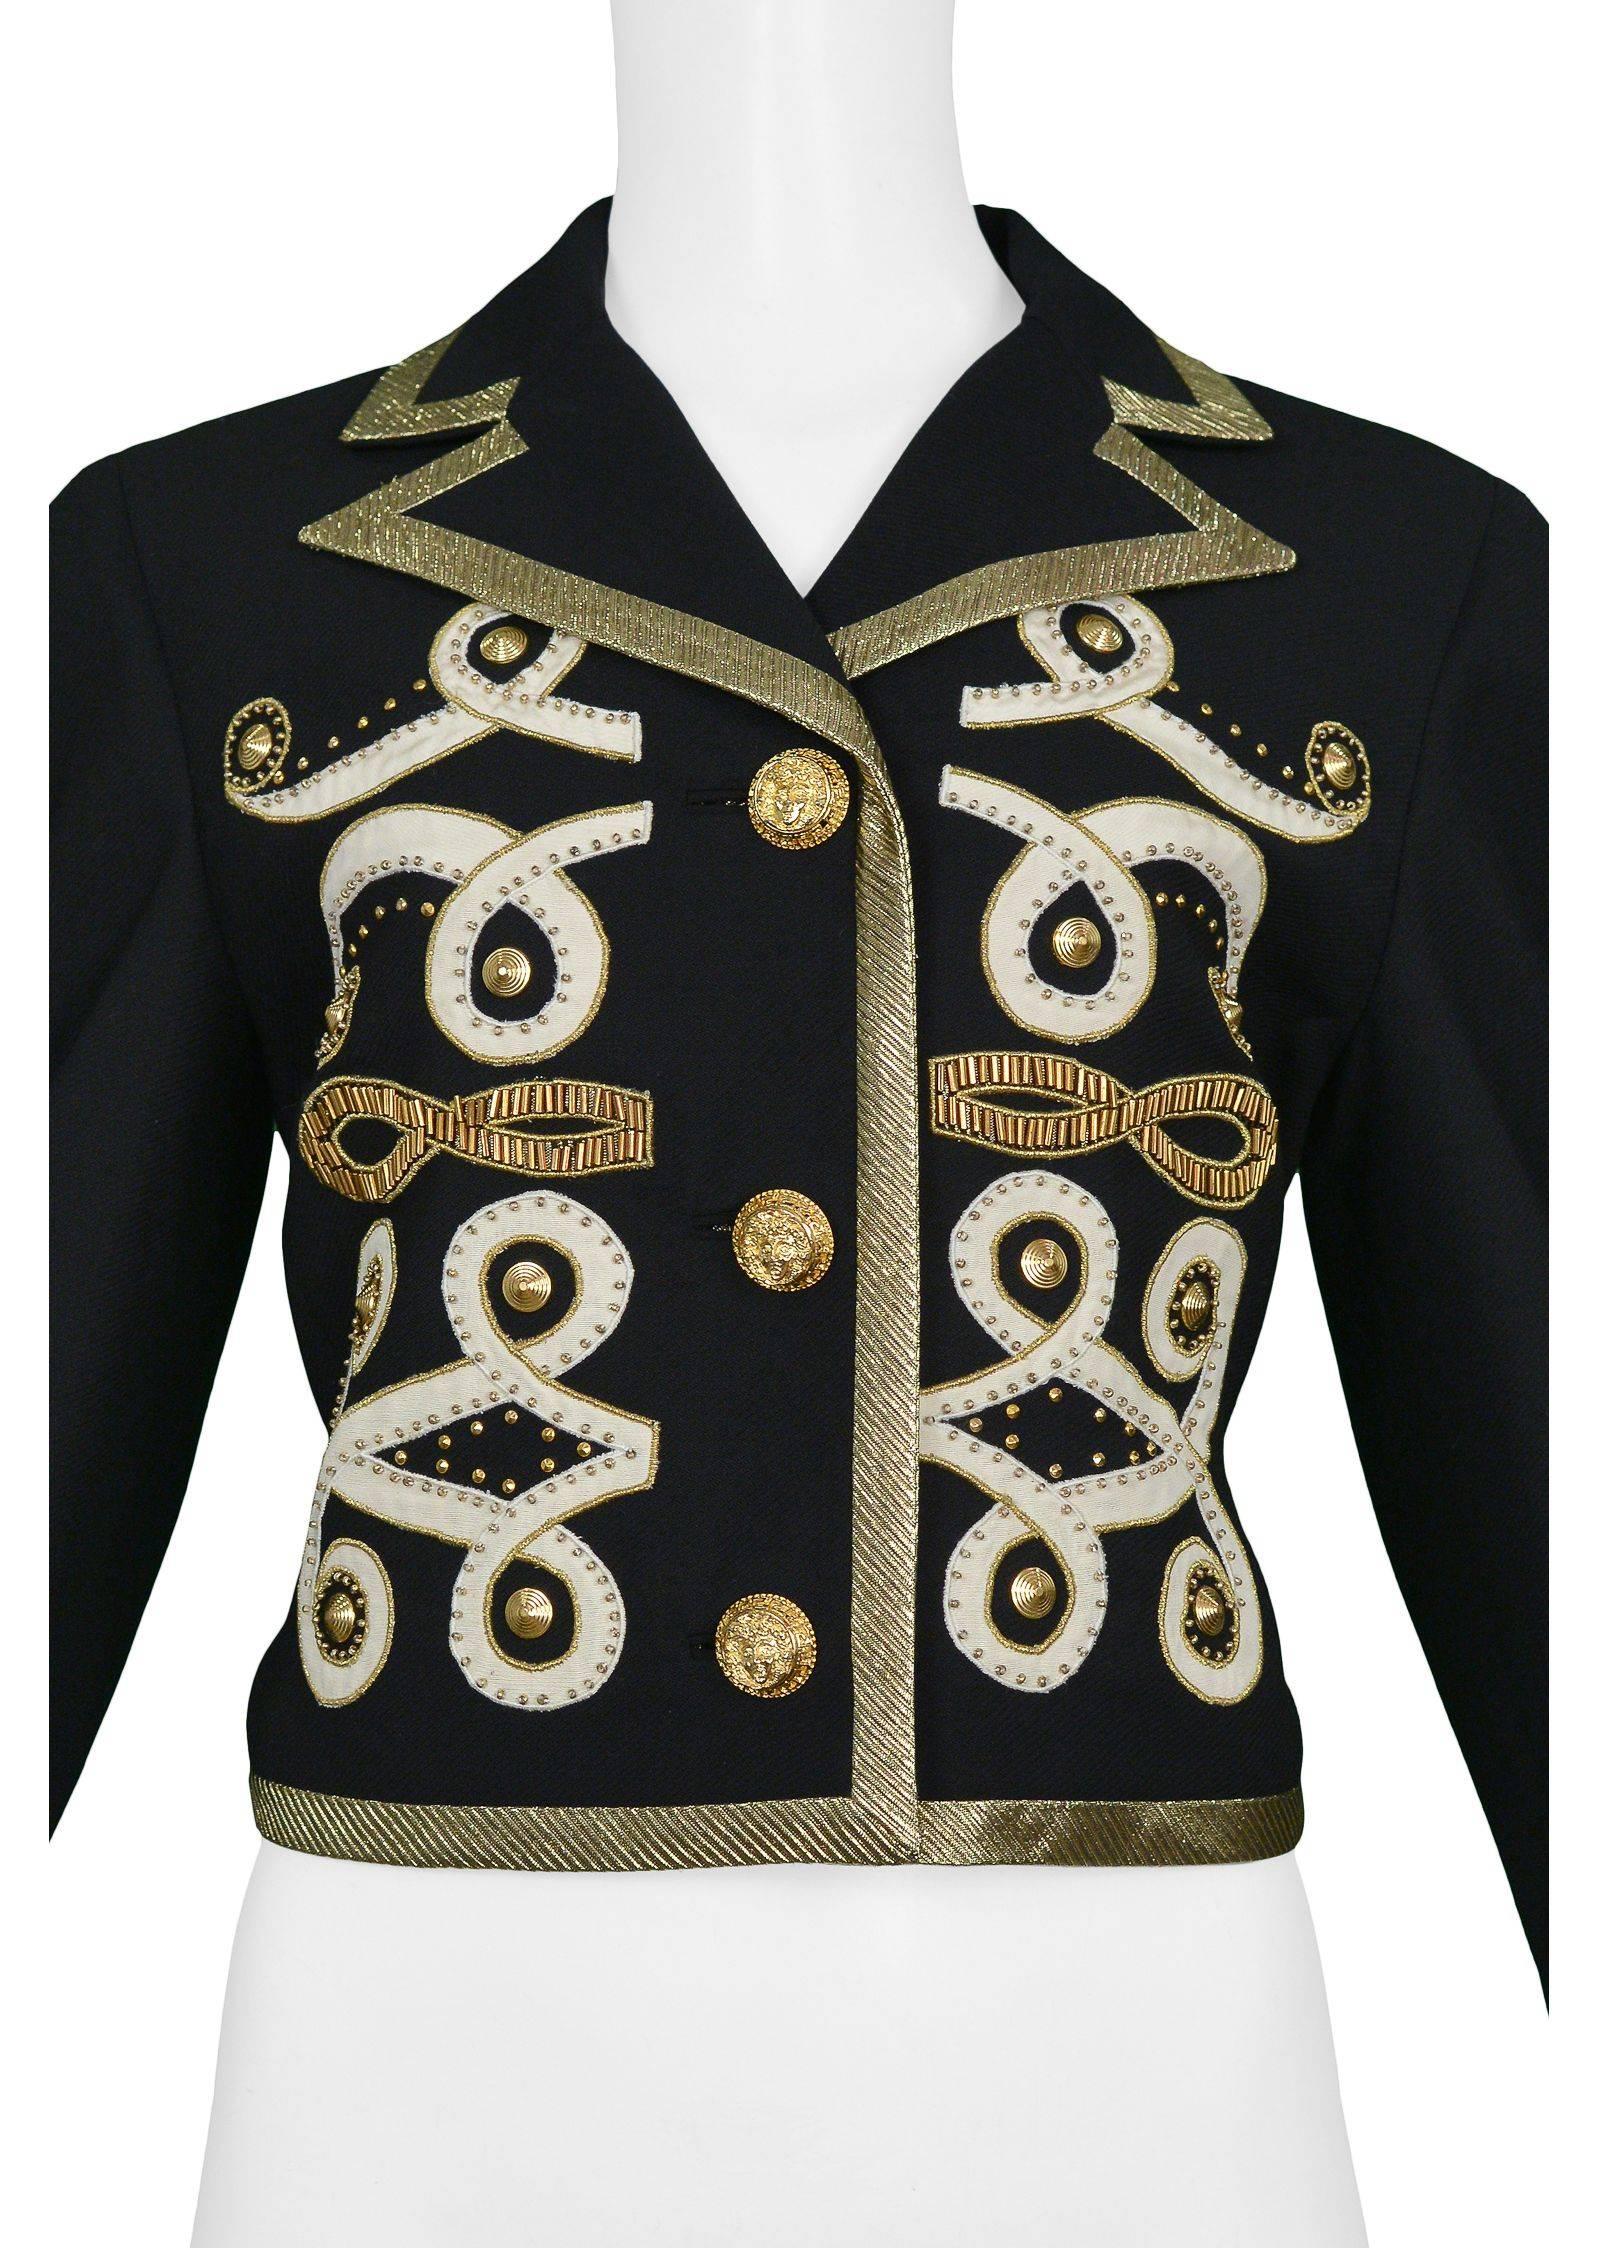 Vintage Gianni Versace black wool button front jacket. The jacket features gold fabric trim and Versace's iconic Baroque applique detailing, gold studs, and gold Medusa head buttons.